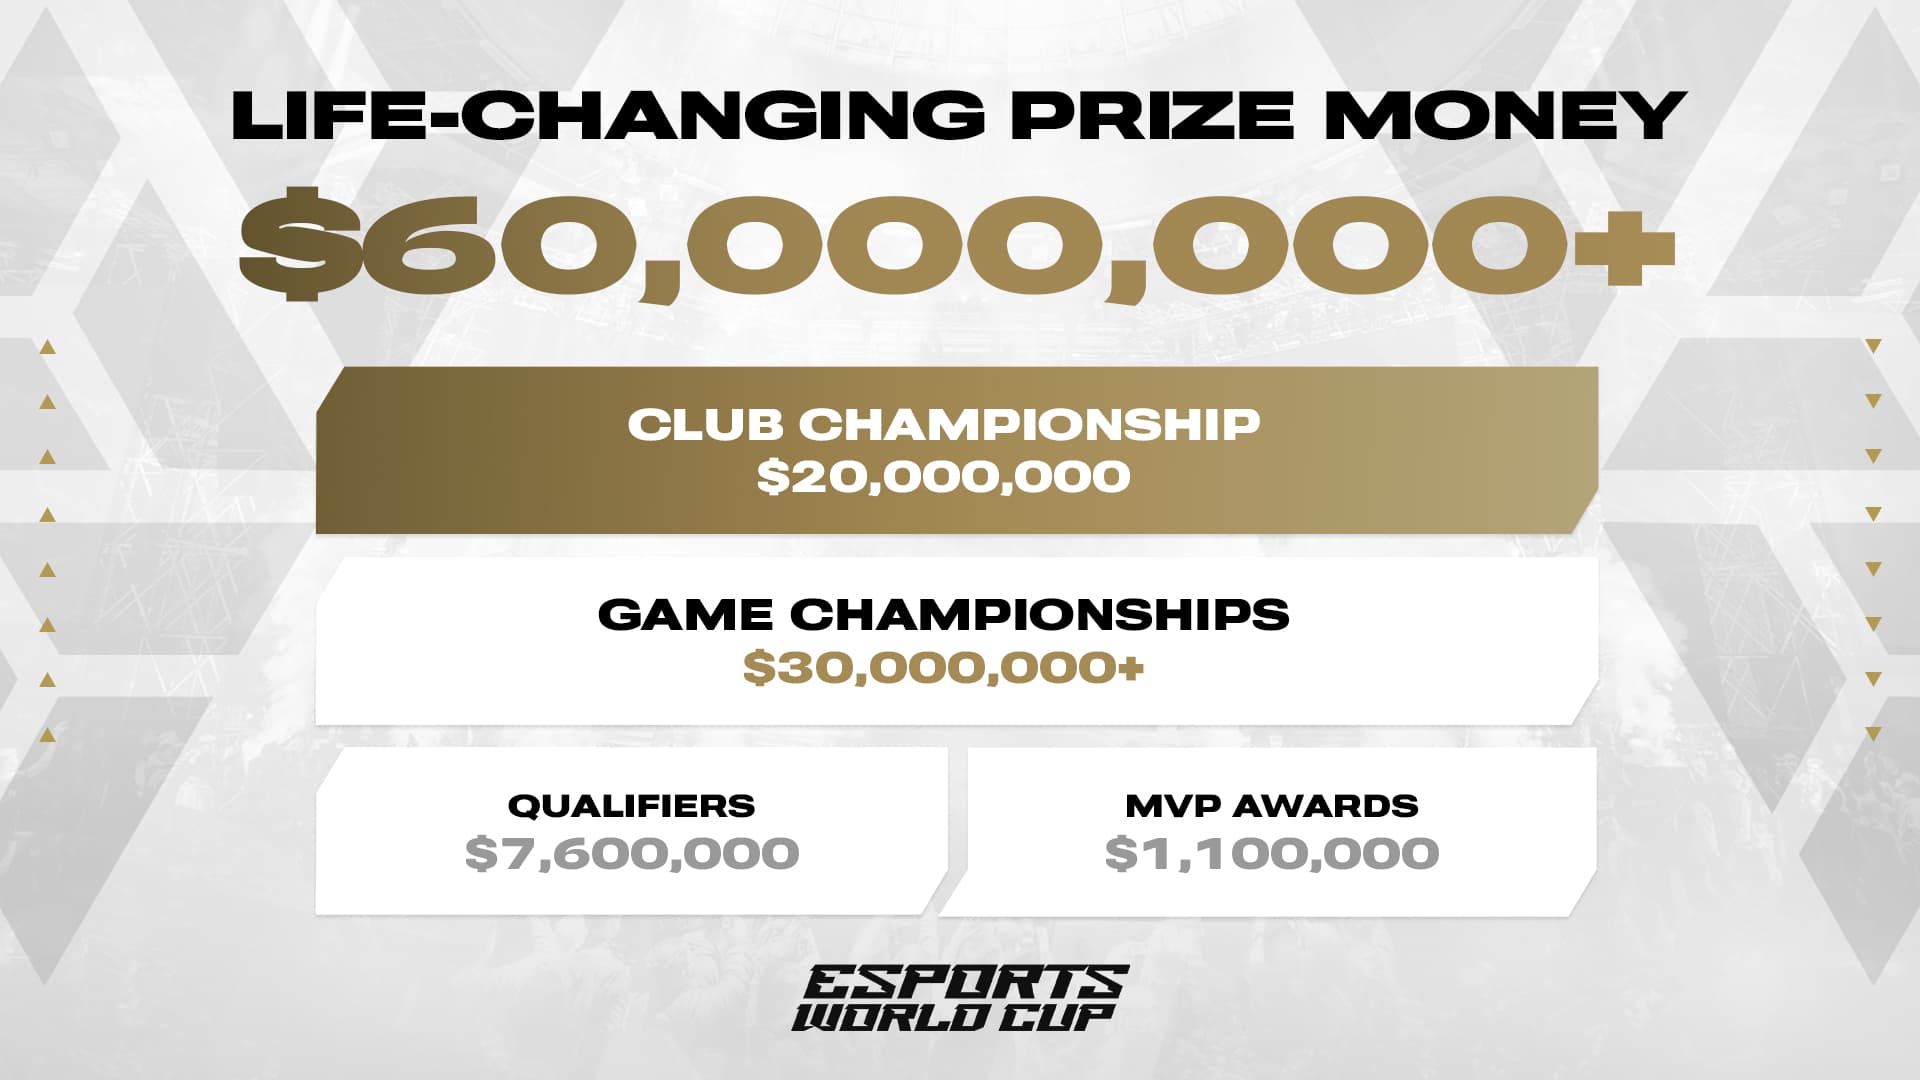 Life-changing $60,000,000+ prize money